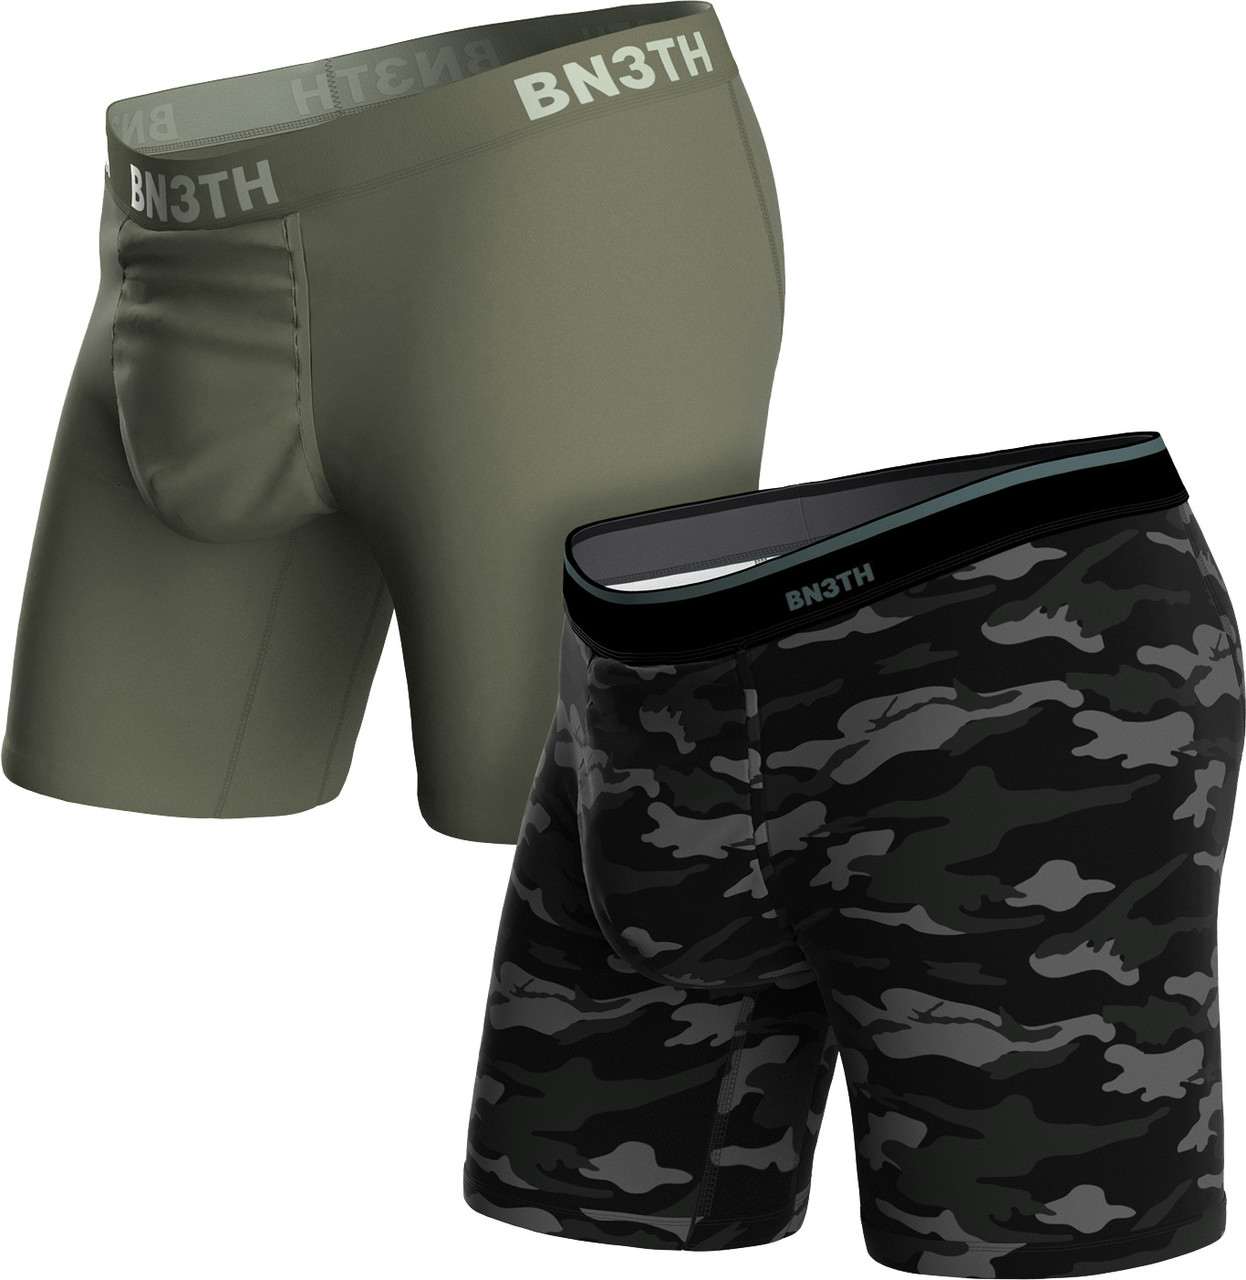 Classic Boxer Briefs (2 Pack) Pine/Covert Camo